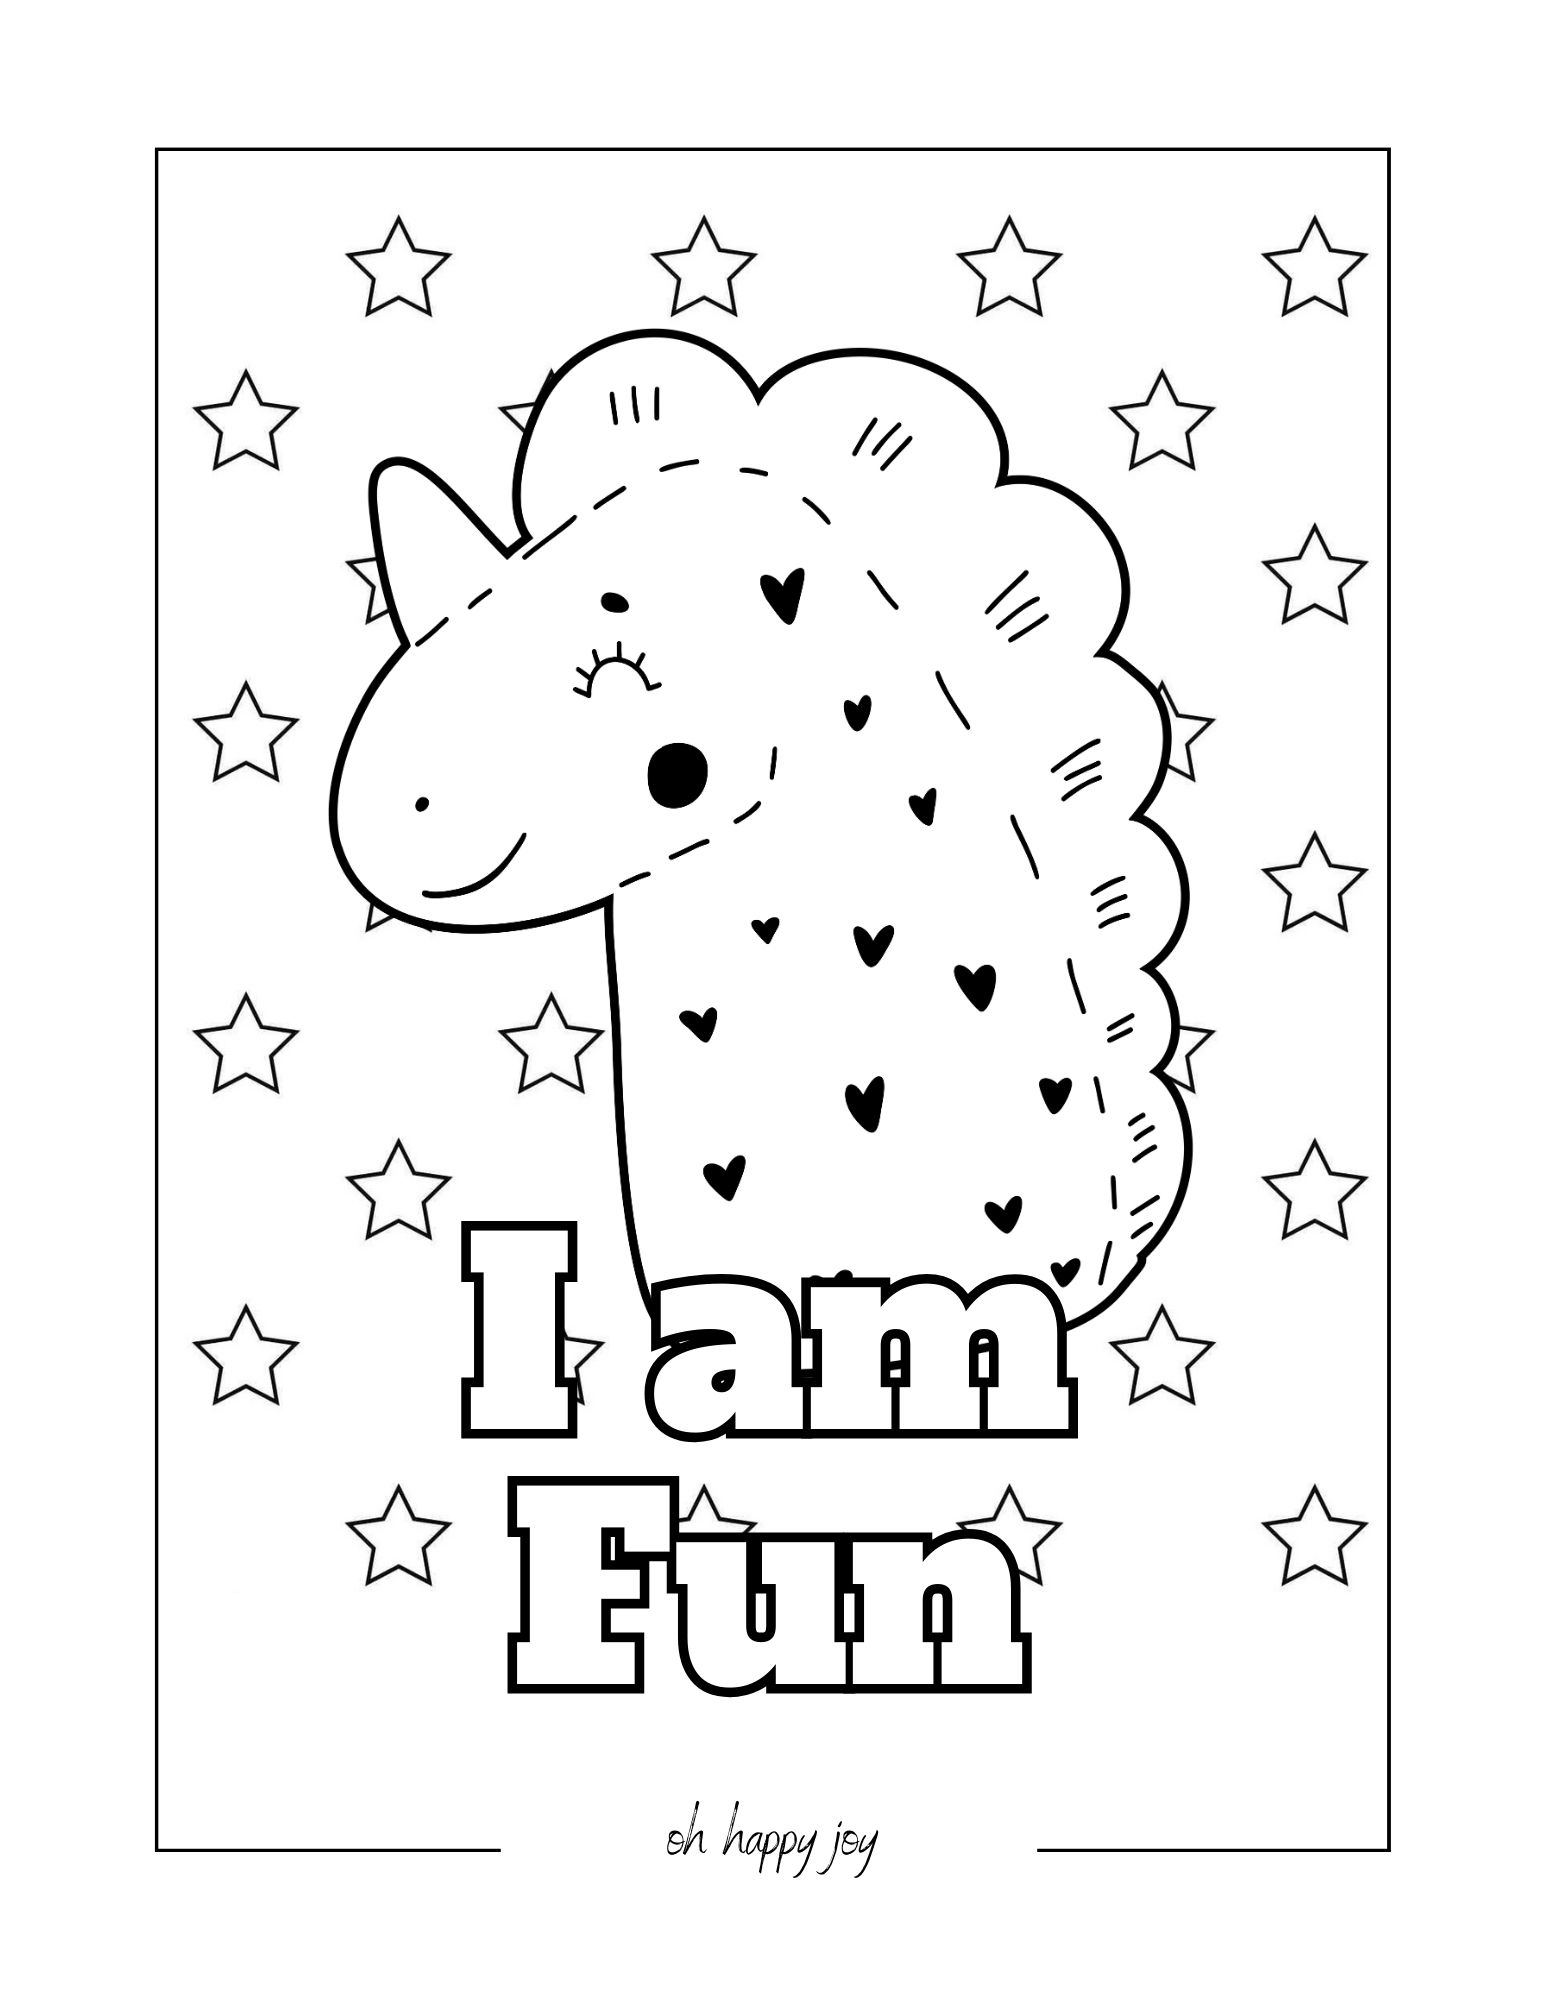 I am fun affirmation coloring page